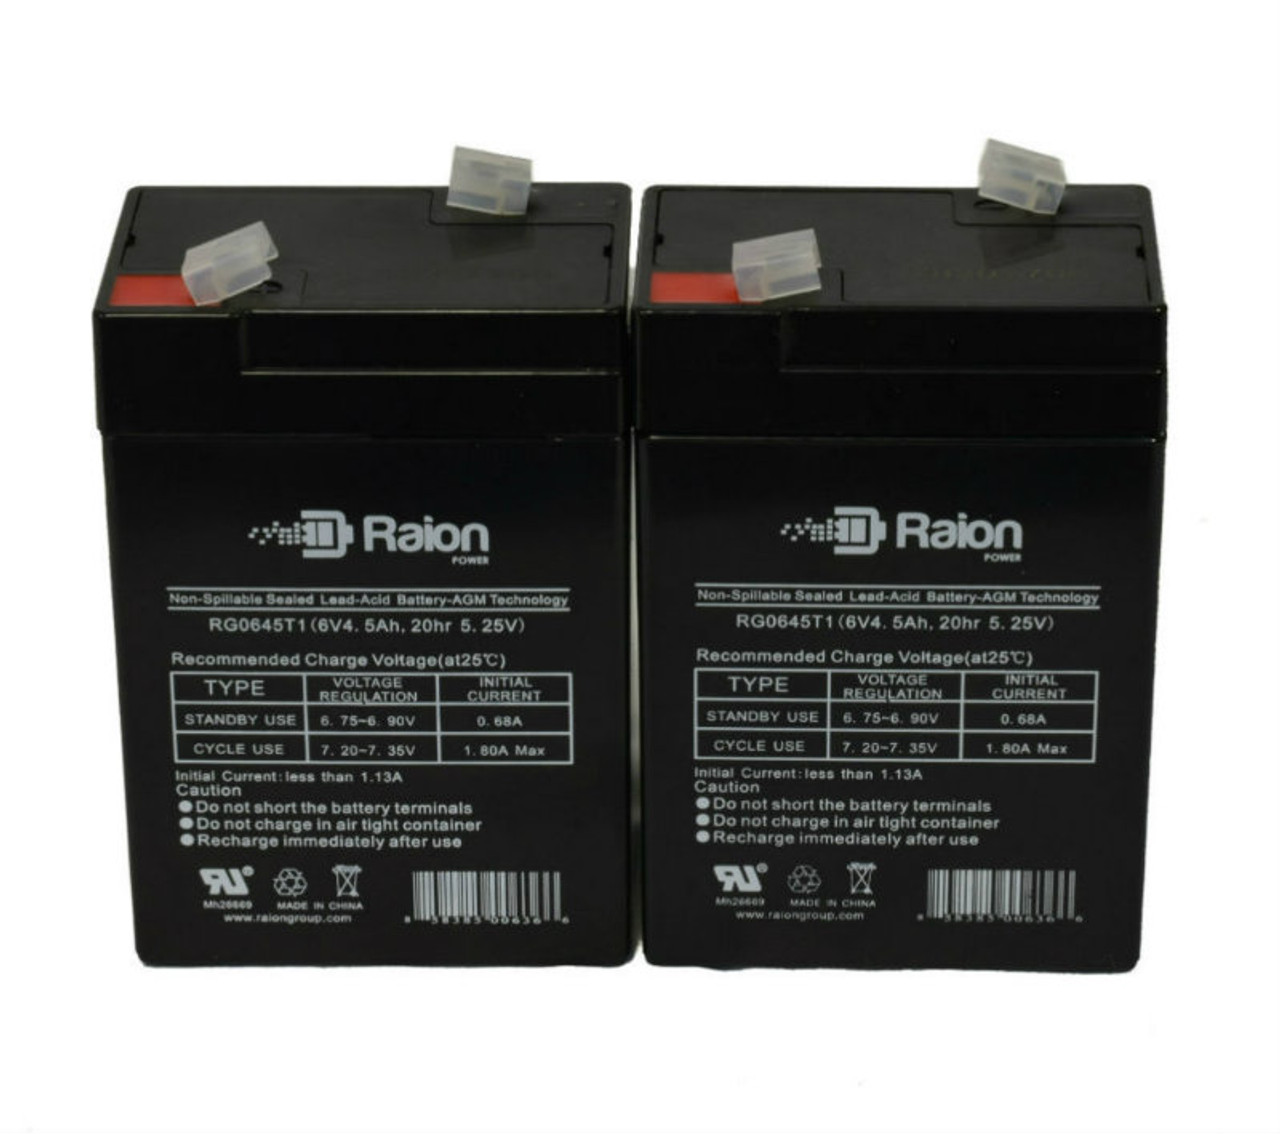 Raion Power 6 Volt 4.5Ah RG0645T1 Replacement Battery for Teledyne 2ET6S5 - 2 Pack